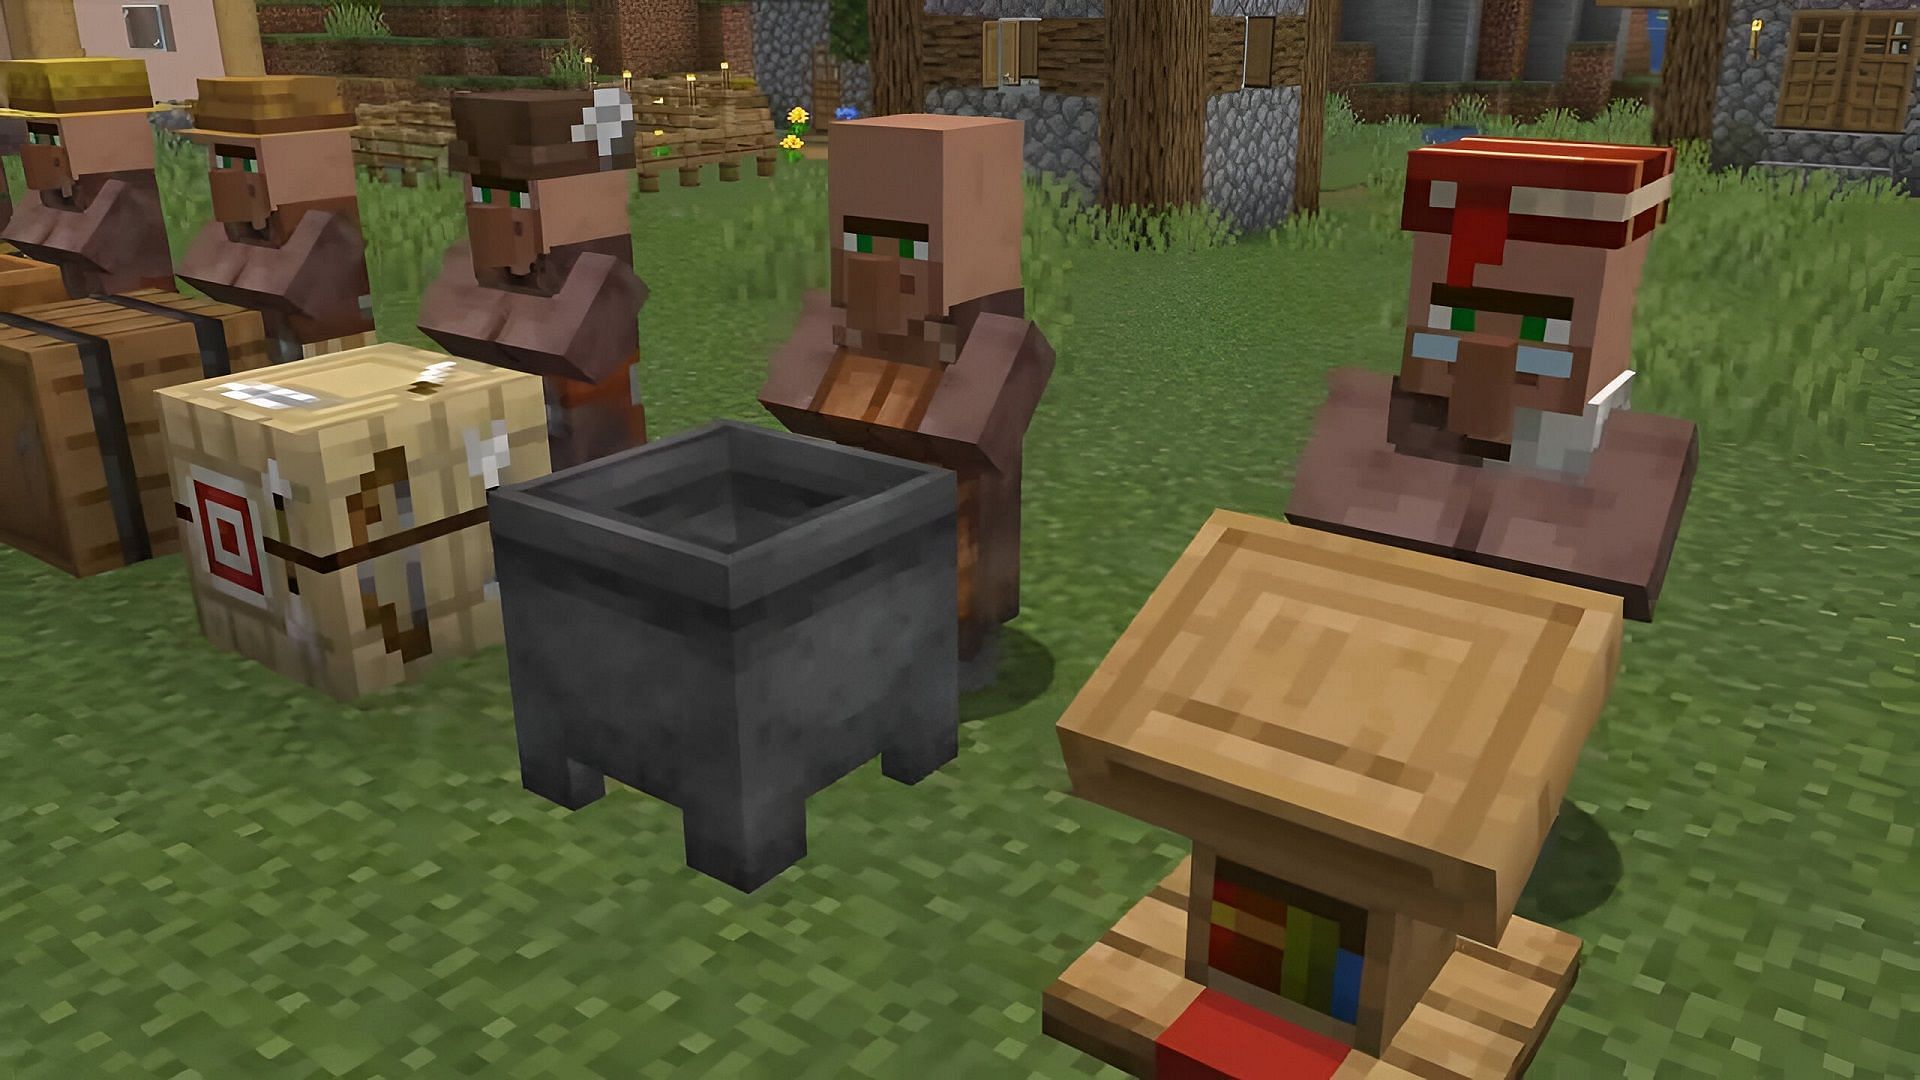 A row of villagers stand behind their work blocks in Minecraft.